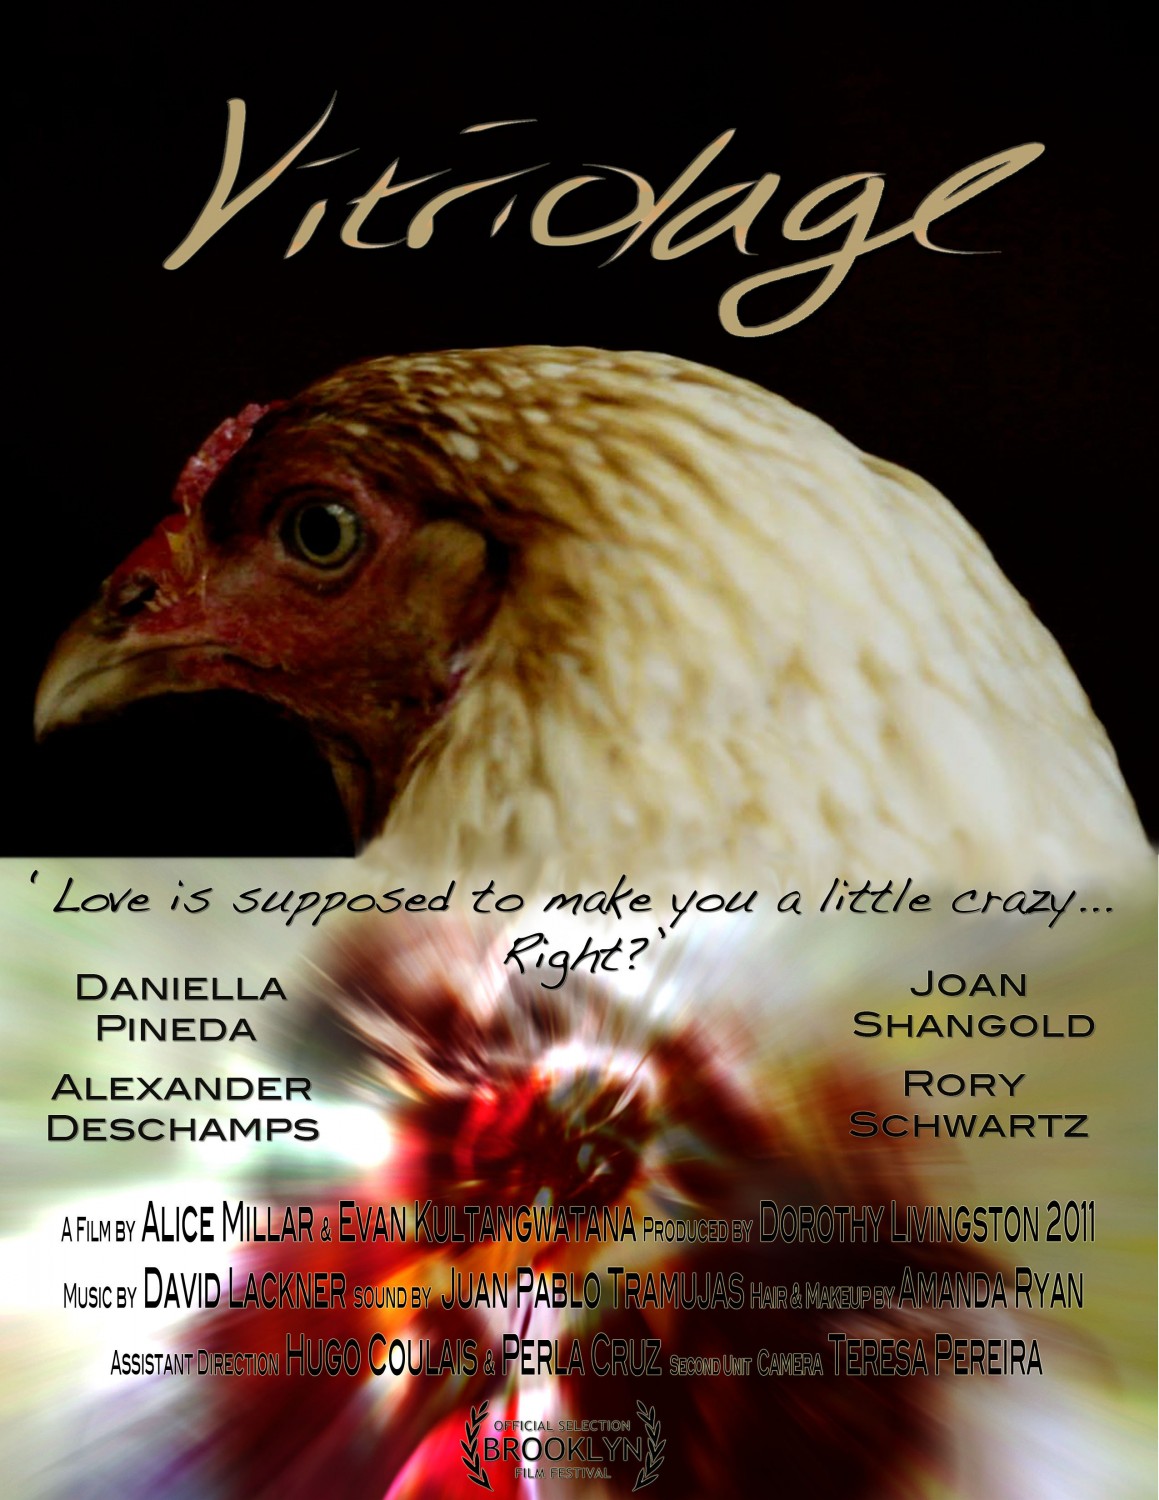 Extra Large Movie Poster Image for Vitriolage